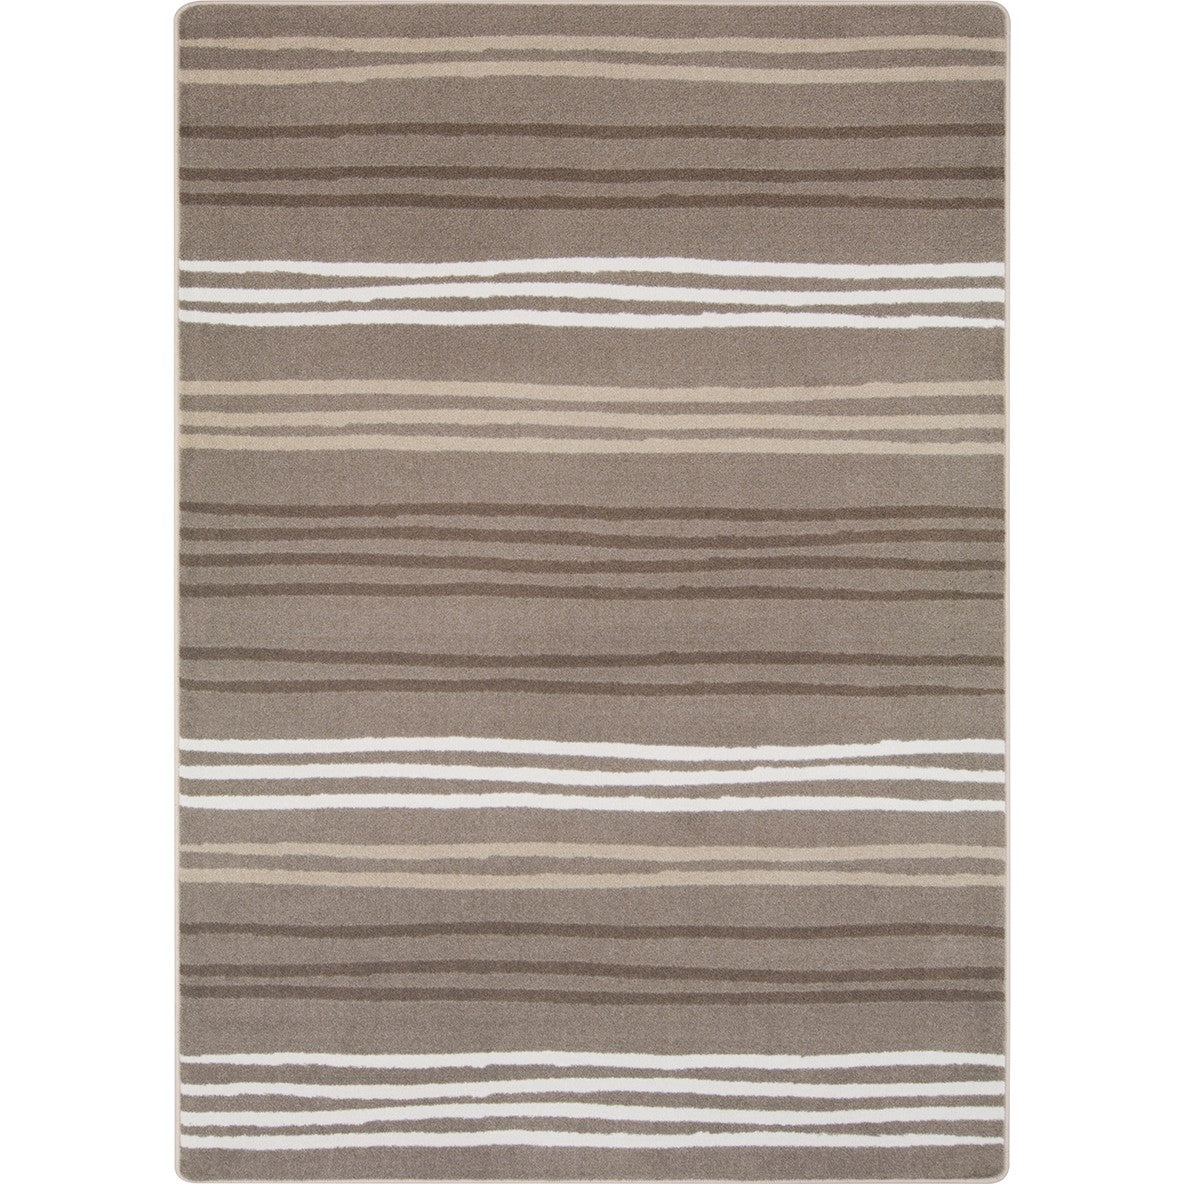 All Lined Up Kid Essentials Collection Area Rug for Classrooms and Schools Libraries by Joy Carpets - SchoolOutlet